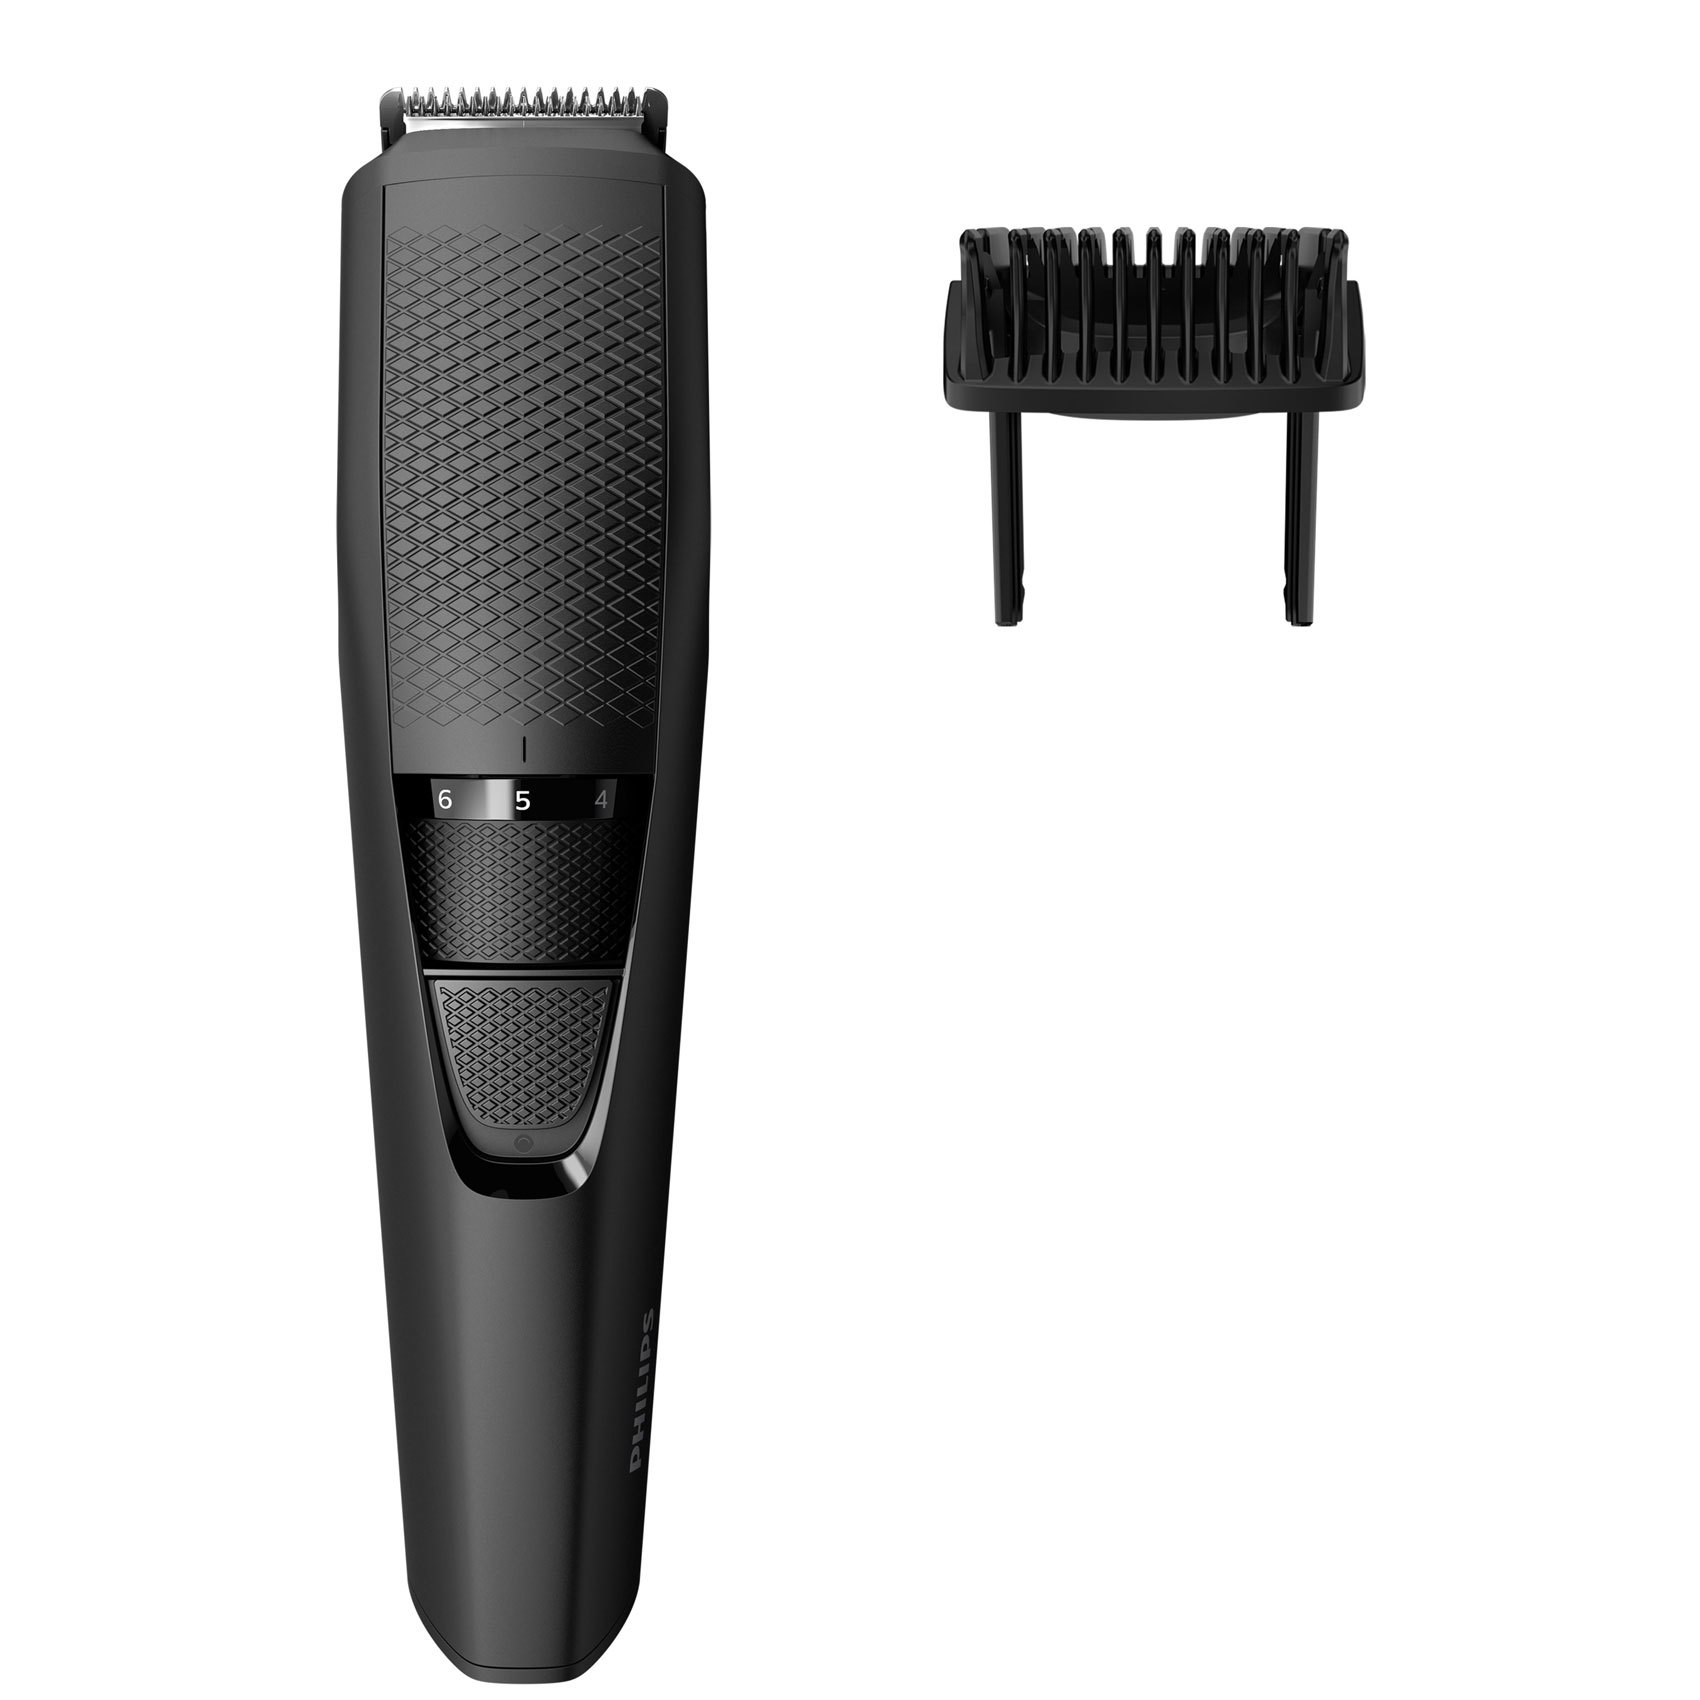 philips all in one trimmer series 3000